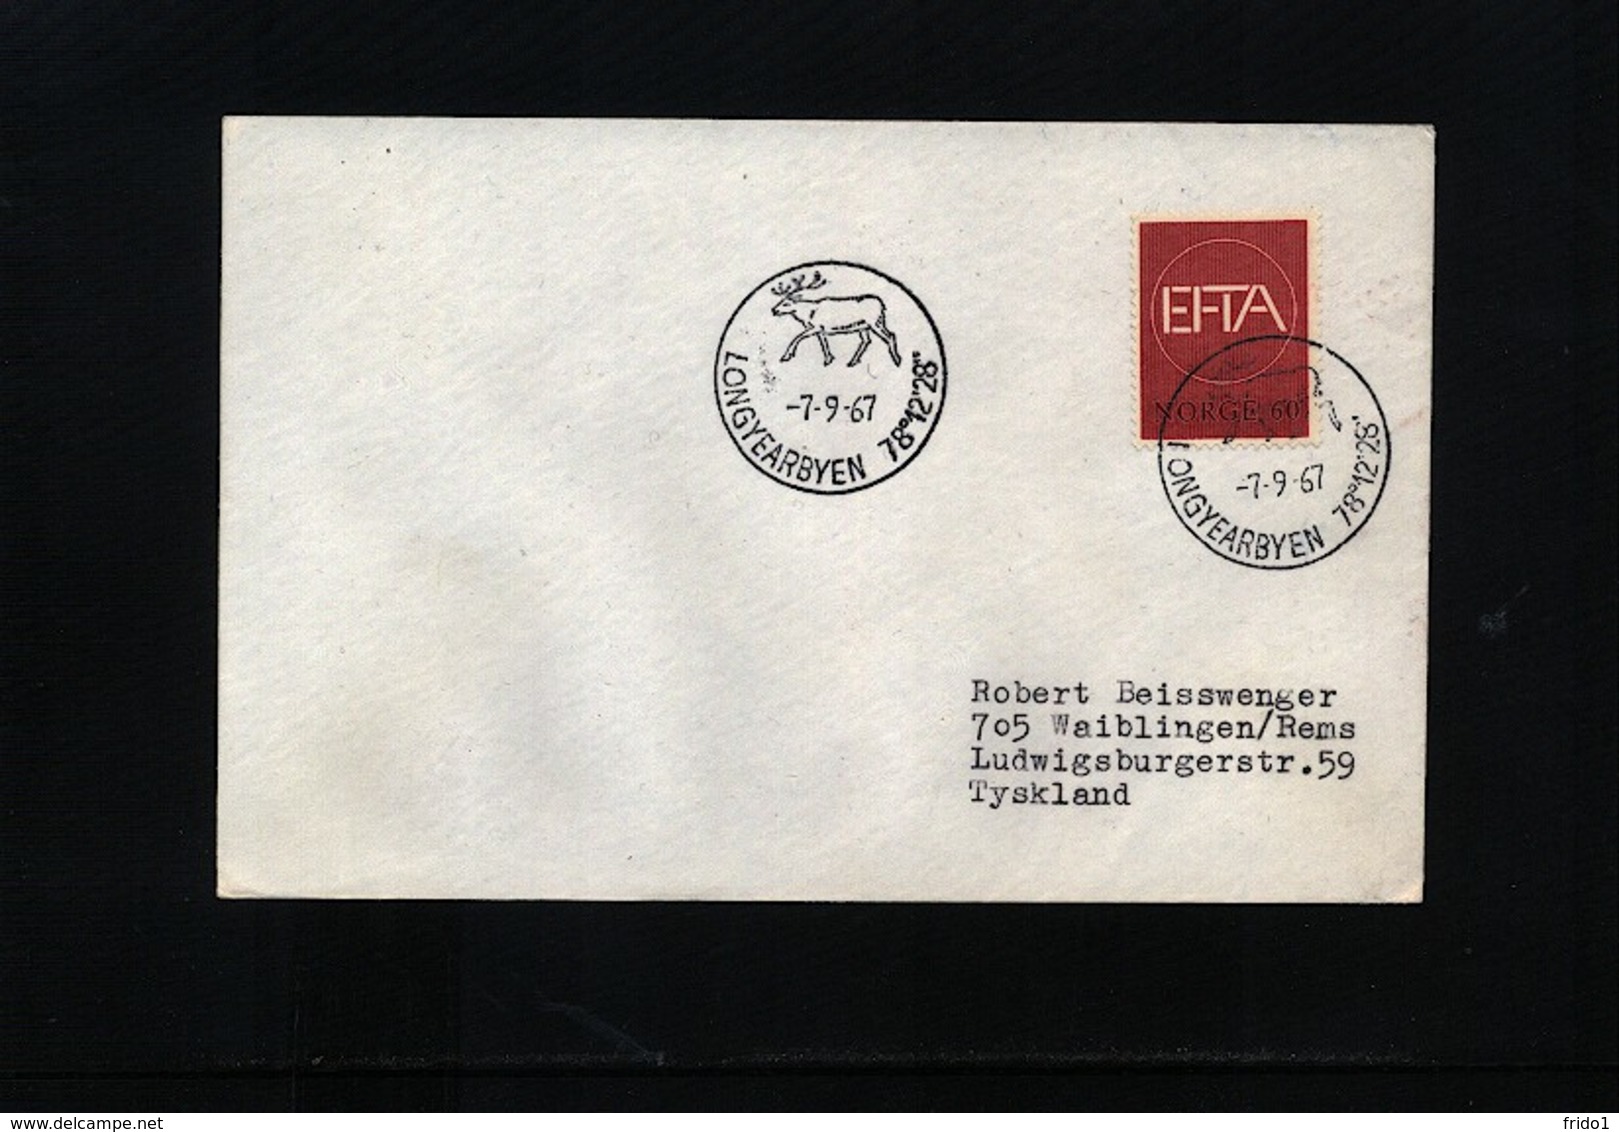 Norway 1967 Spitzbergen / Svalbard Interesting Cover - Scientific Stations & Arctic Drifting Stations